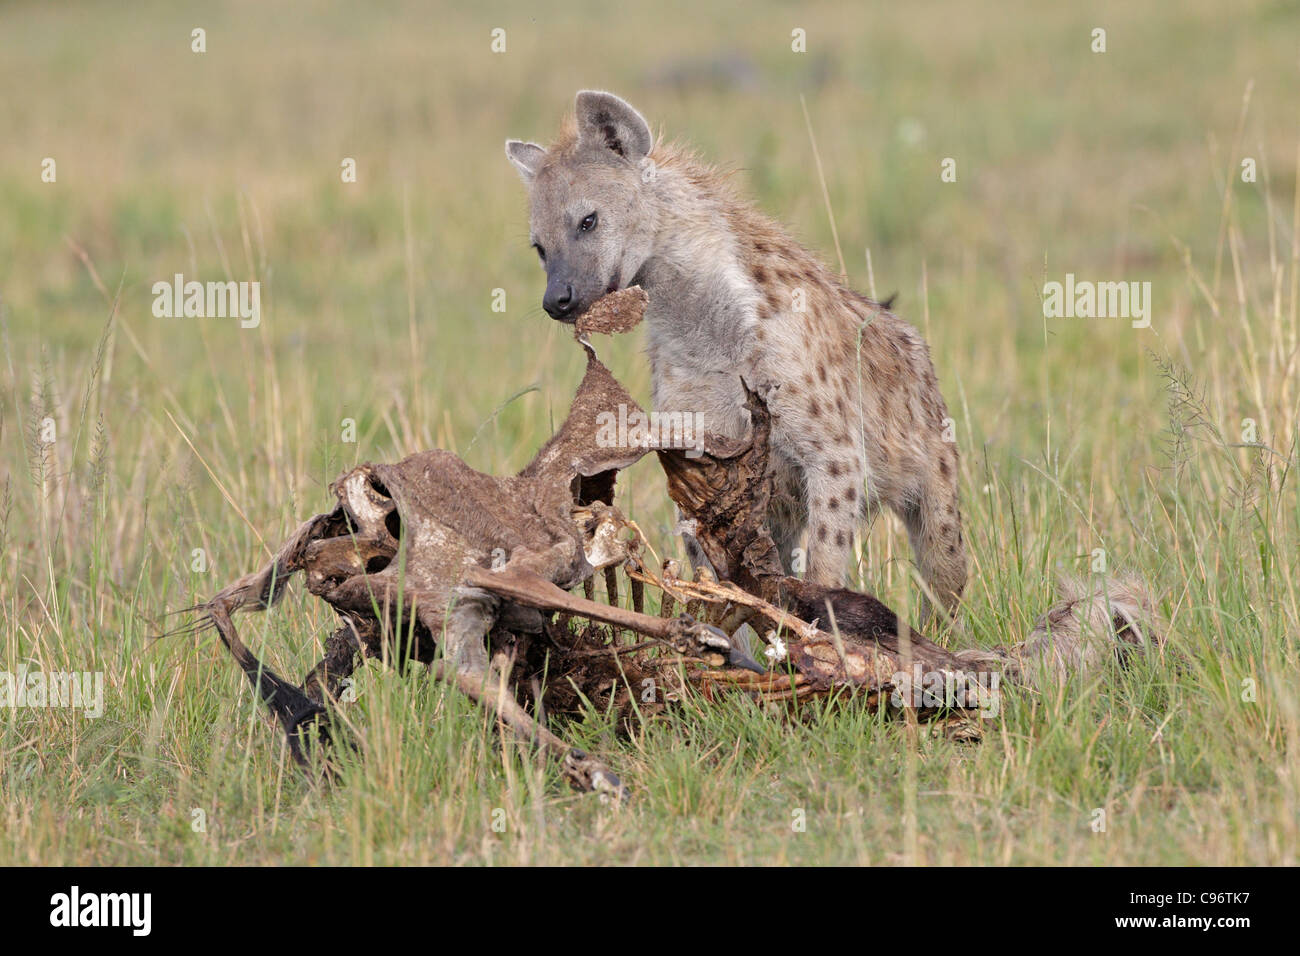 Spotted Hyaena eating skin of an old carcass Stock Photo